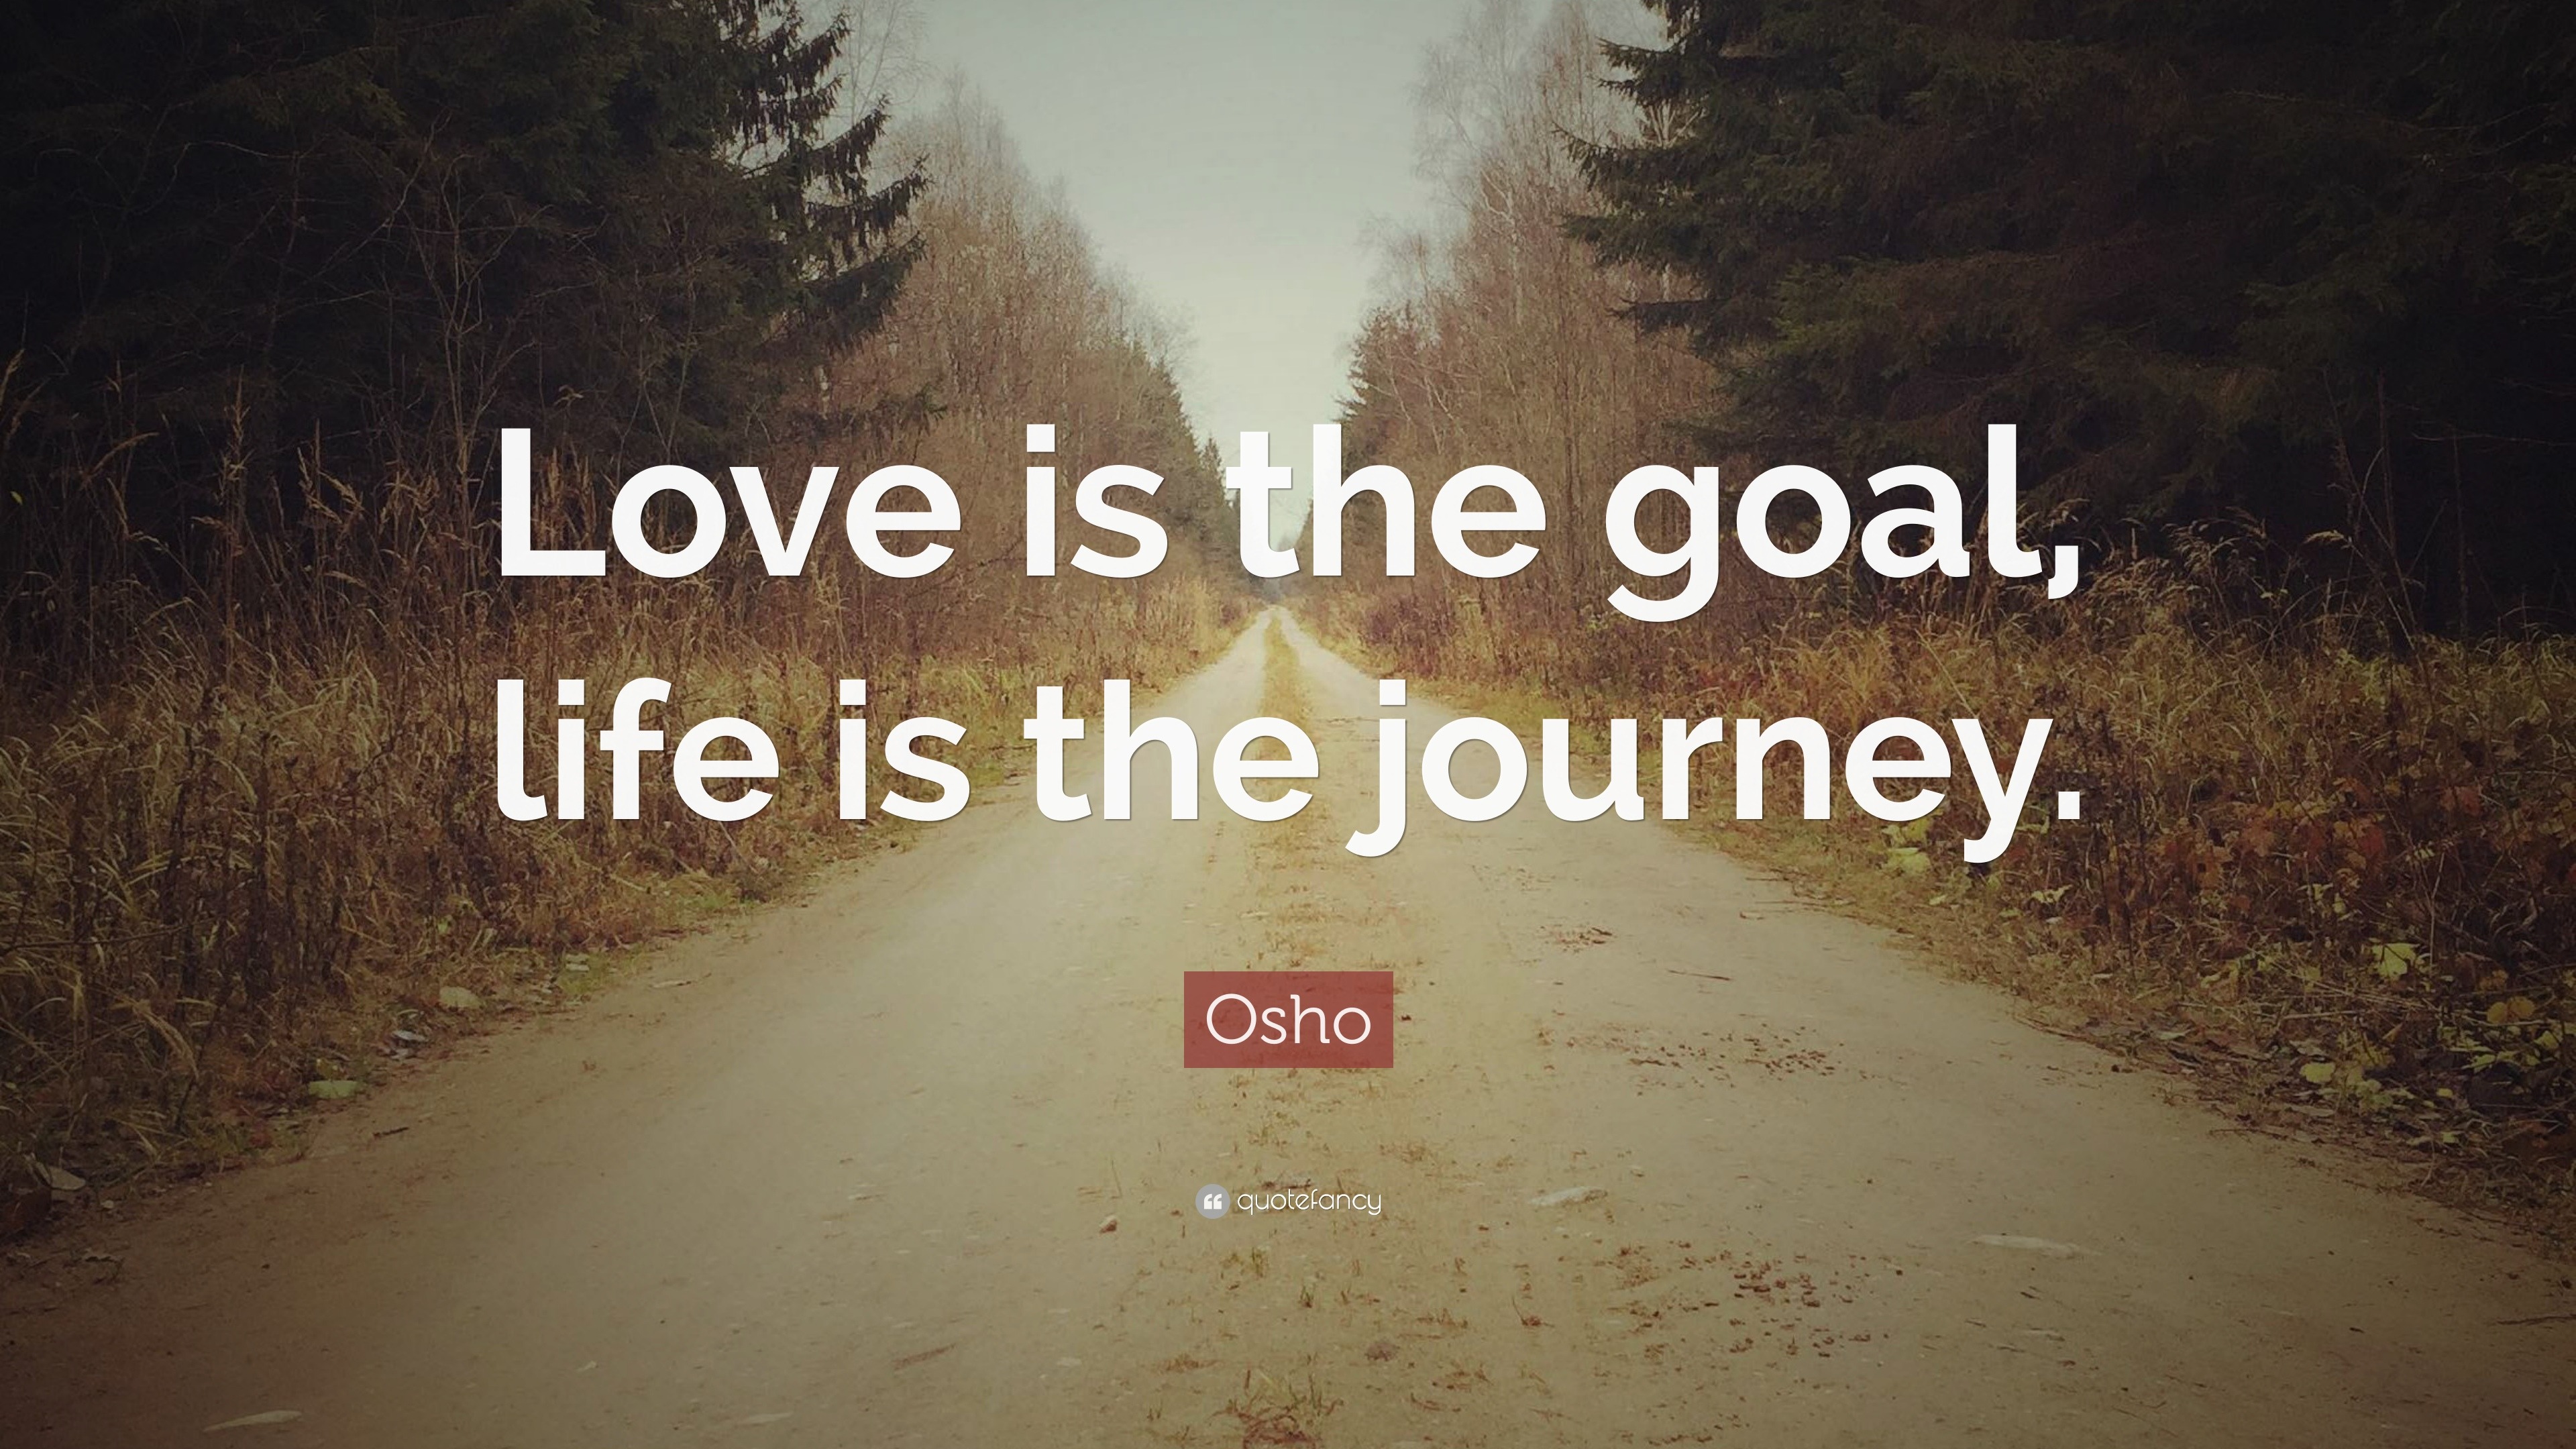 Osho Quote “Love is the goal life is the journey ”